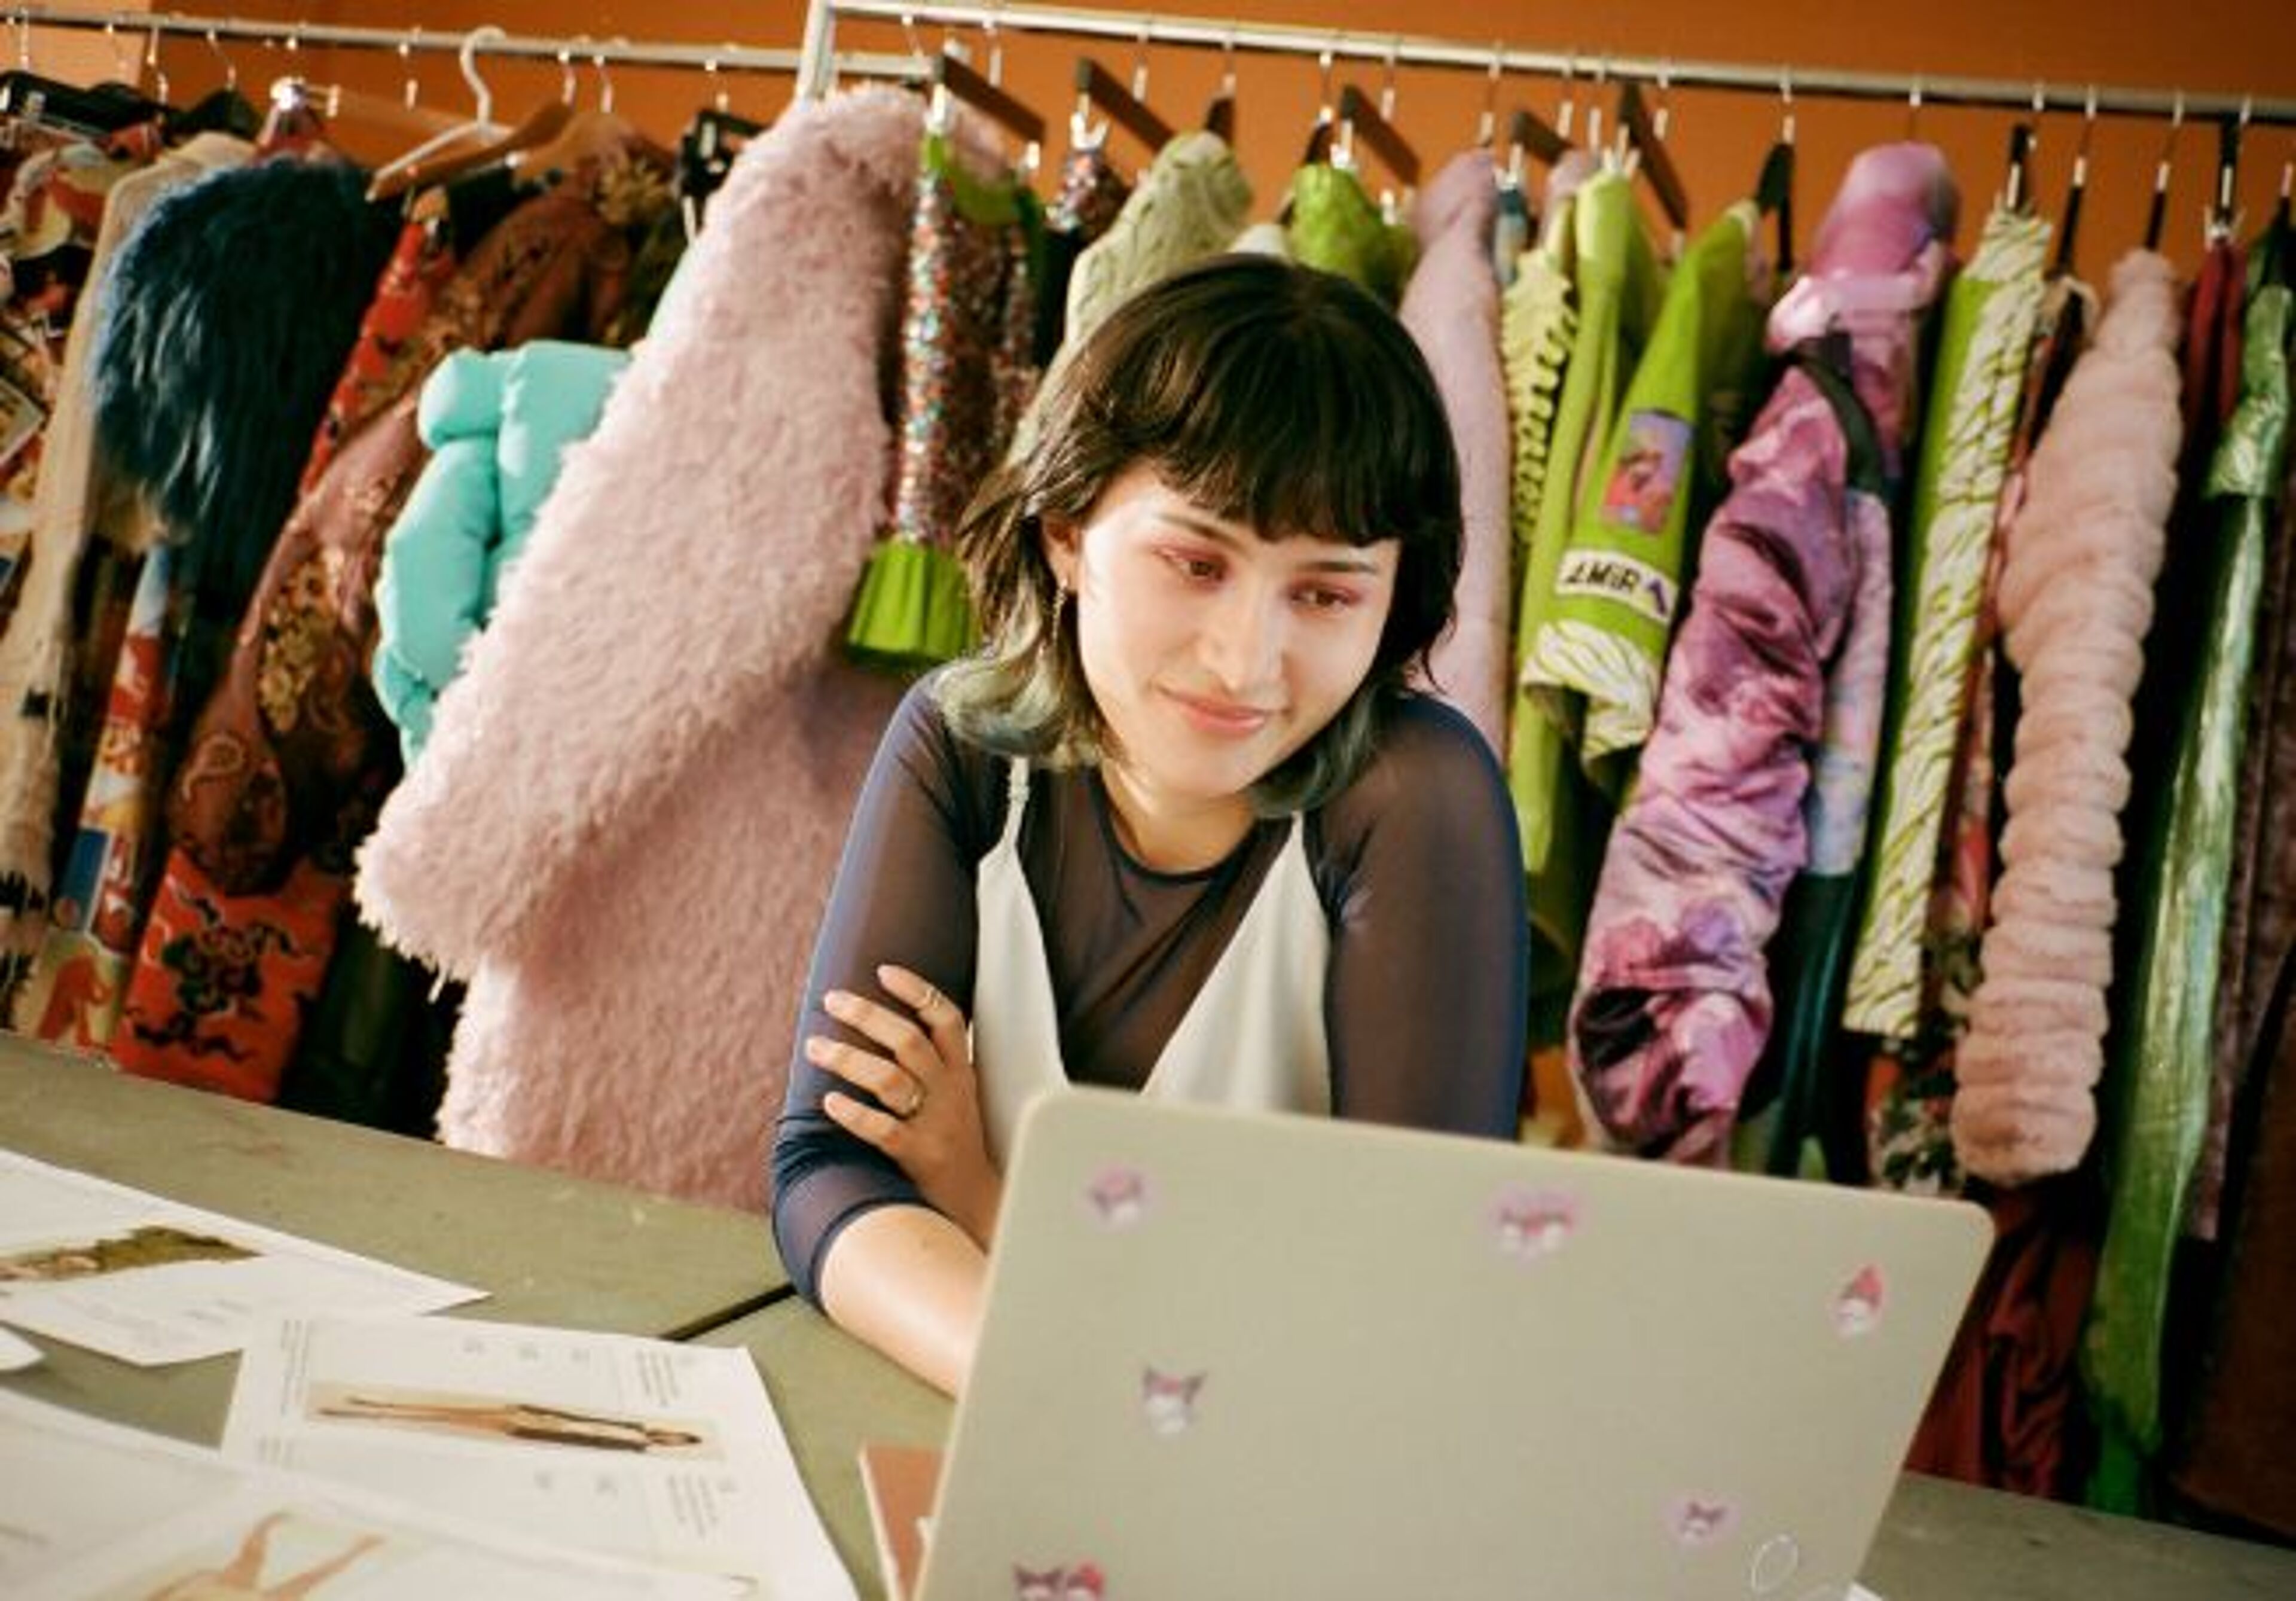 A young fashion designer focused on her laptop in a vibrant studio, surrounded by a colorful array of textured garments hanging in the background.